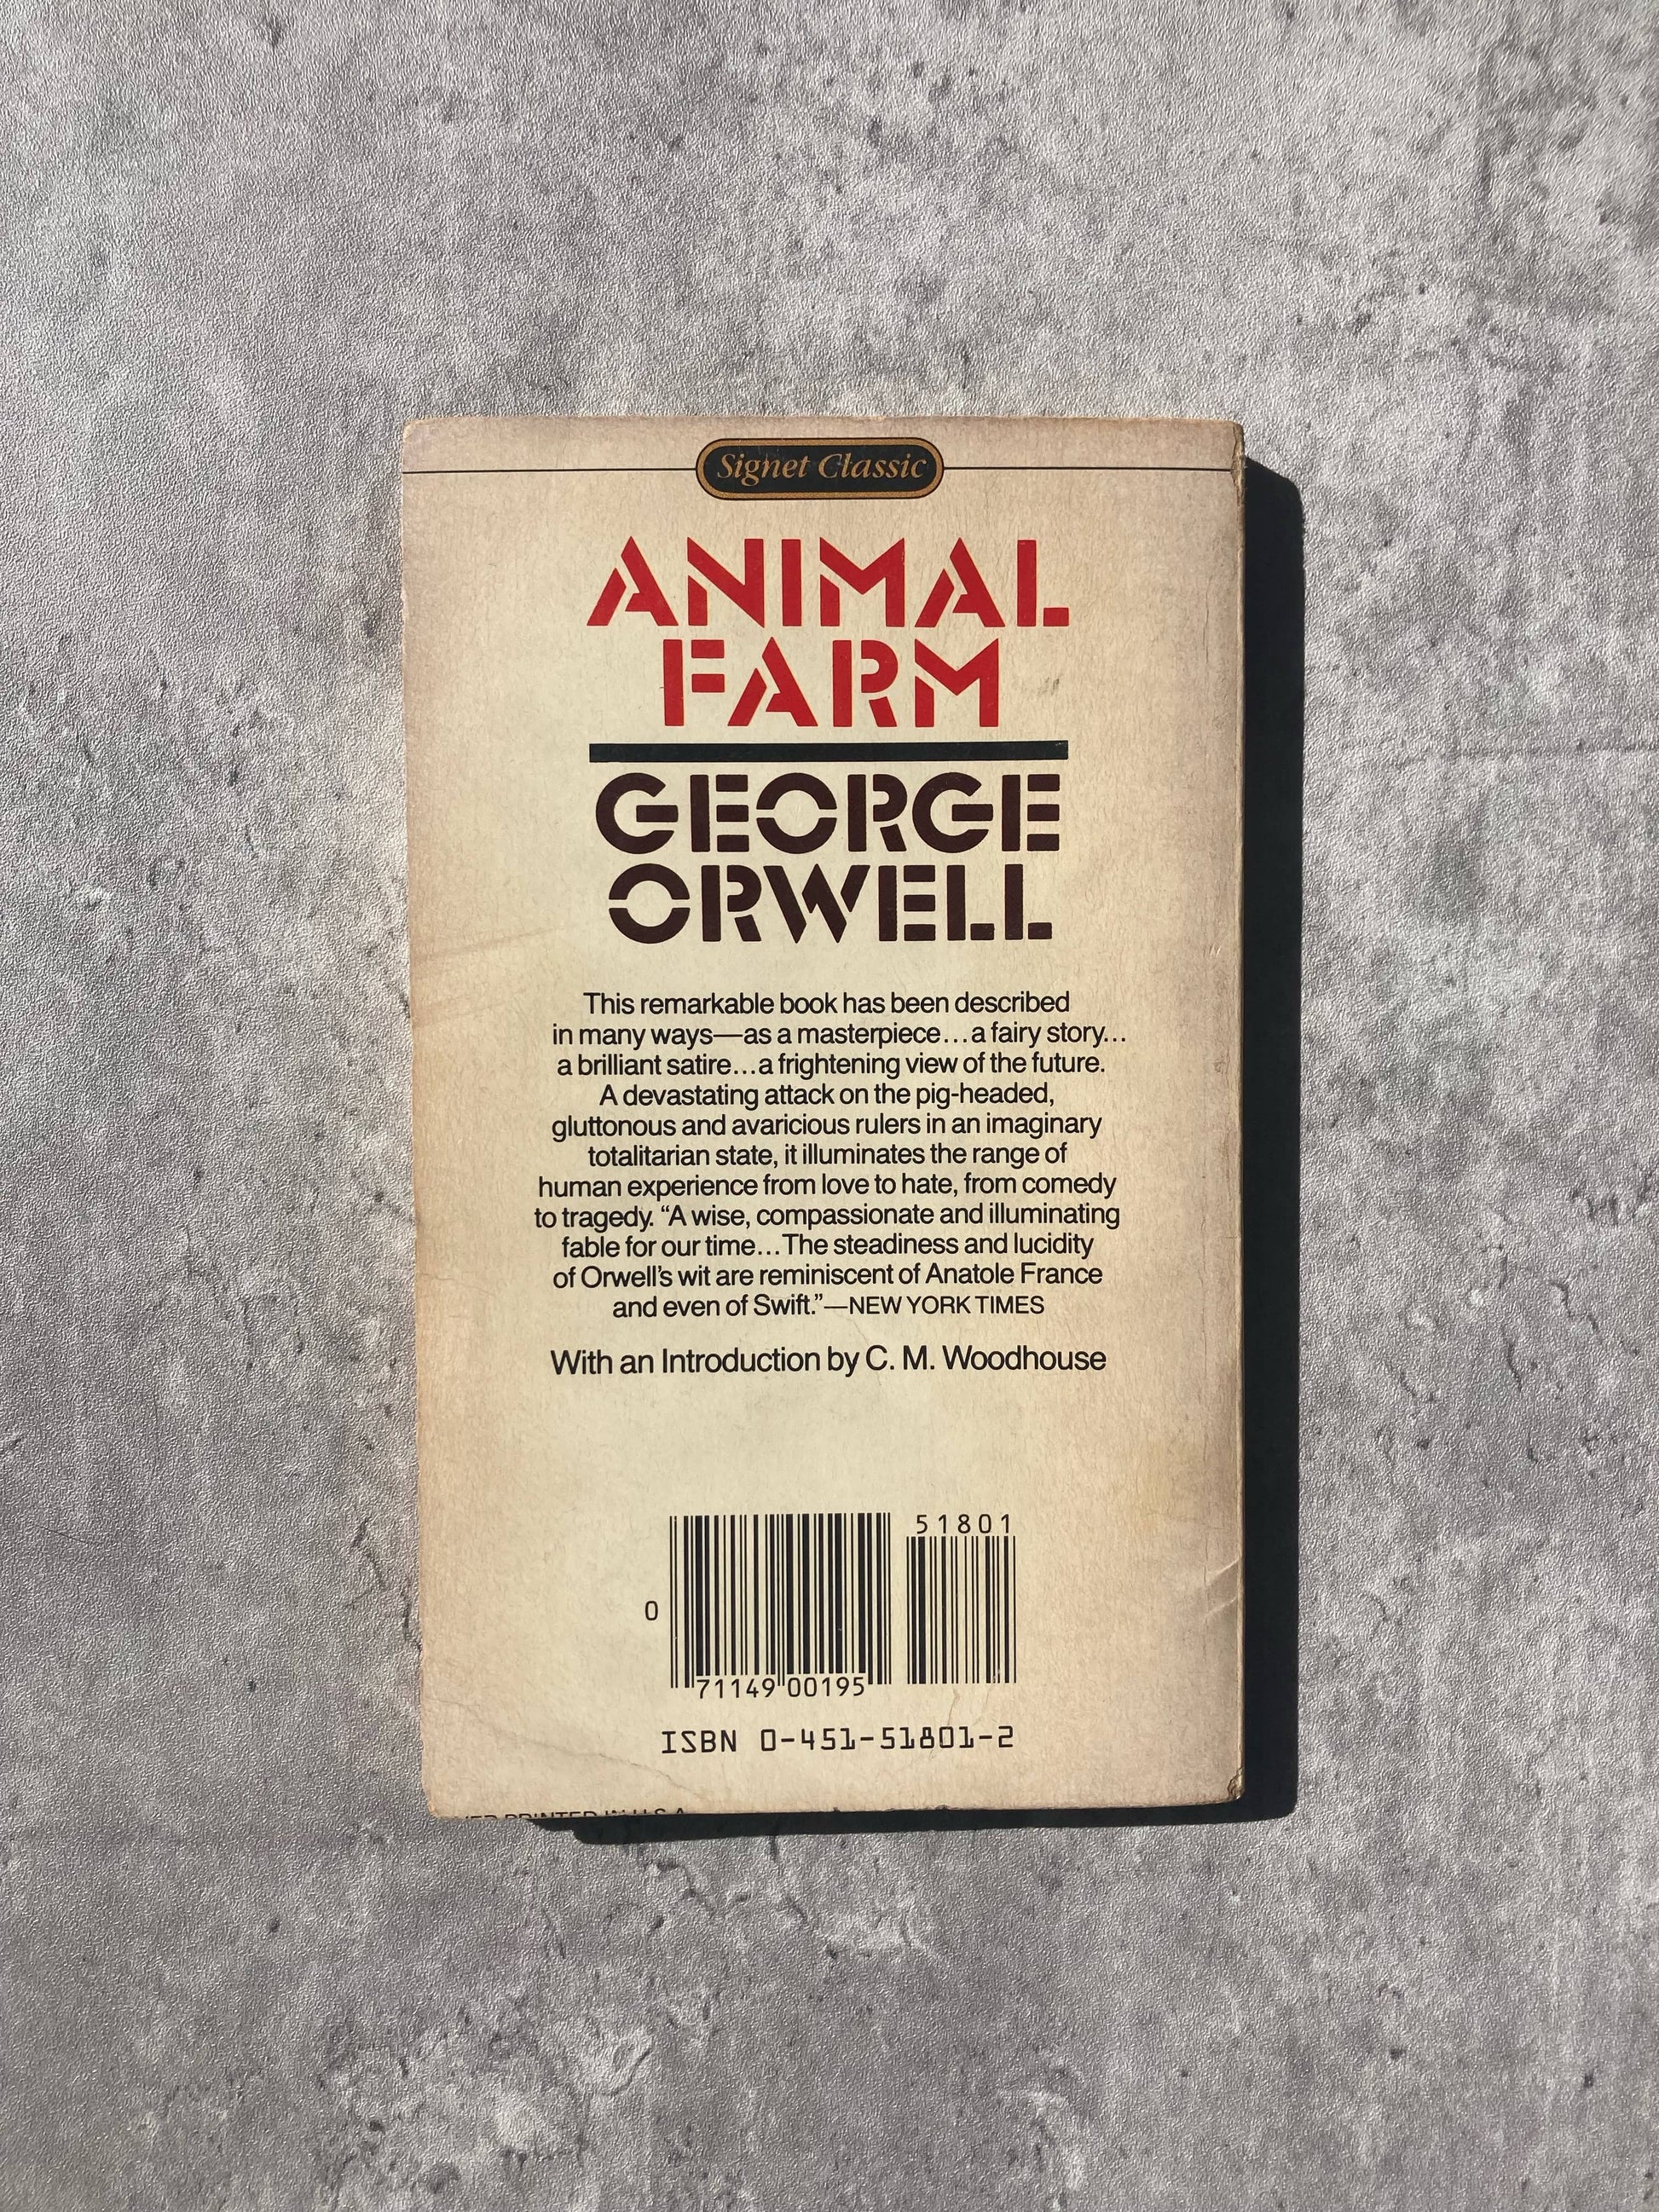 Animal Farm by George Orwell. Shop all new and used books online at The Stone Circle, the only online bookstore in Los Angeles, California.